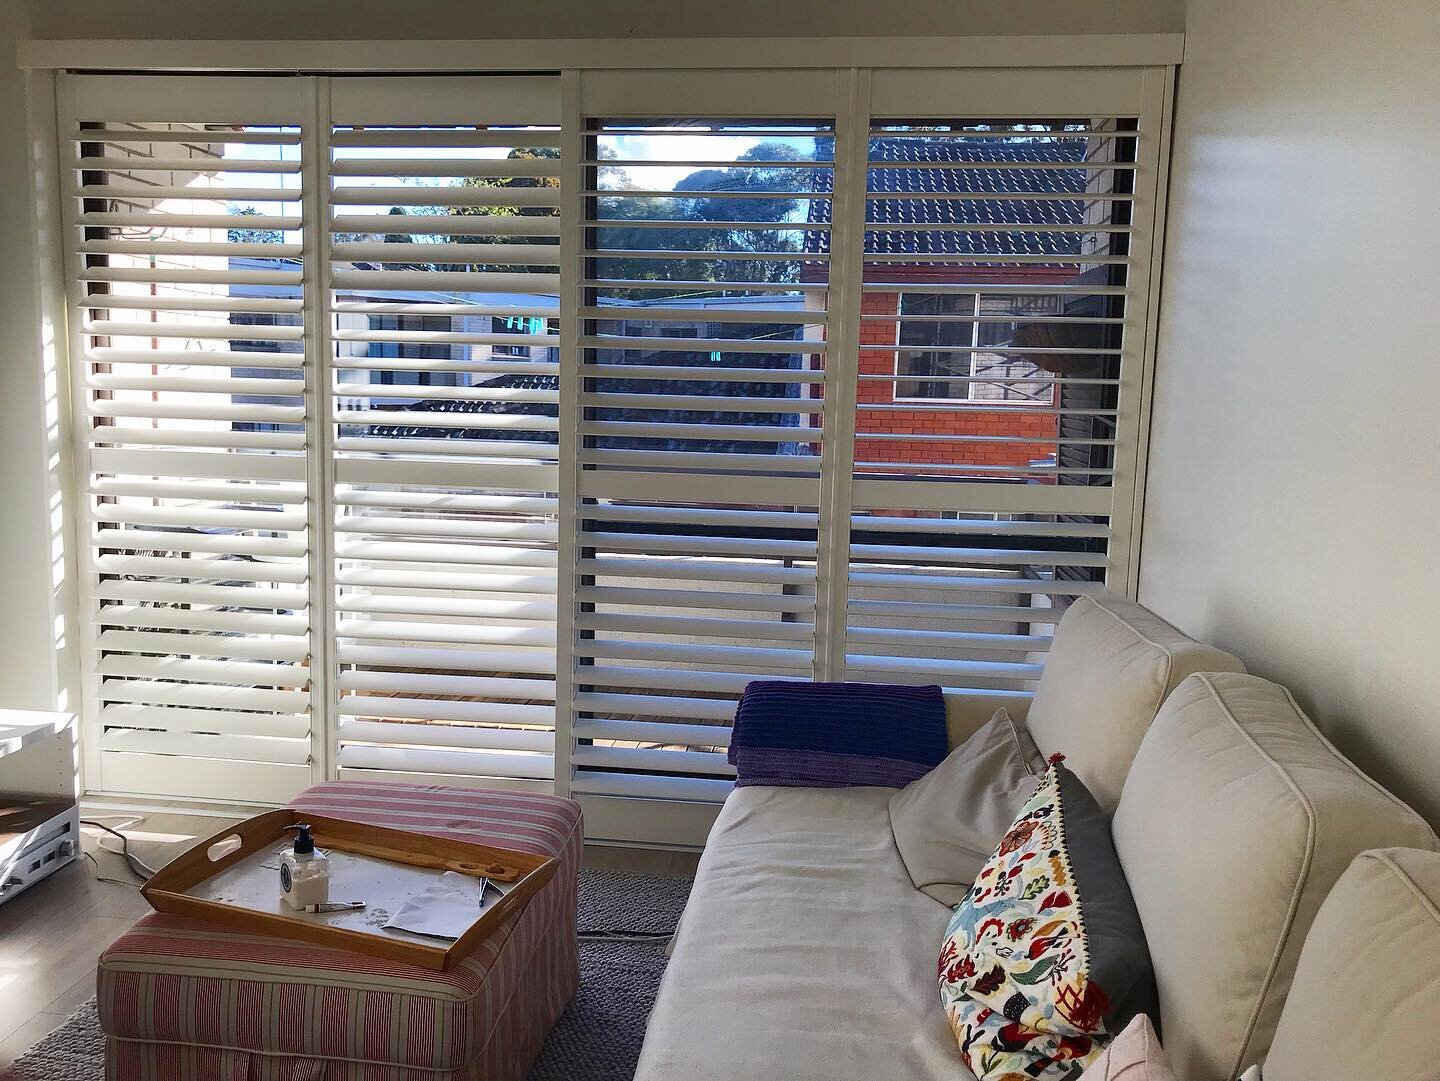 We recommend sliding shutters in open position. It means you can slide shutters without being worry about hitting each other blades.
Happy customer replaced blinds of 2 bedrooms and Lounge area with @normanaustralia shutters for $4750.
.
.
.
.
.
.
#s